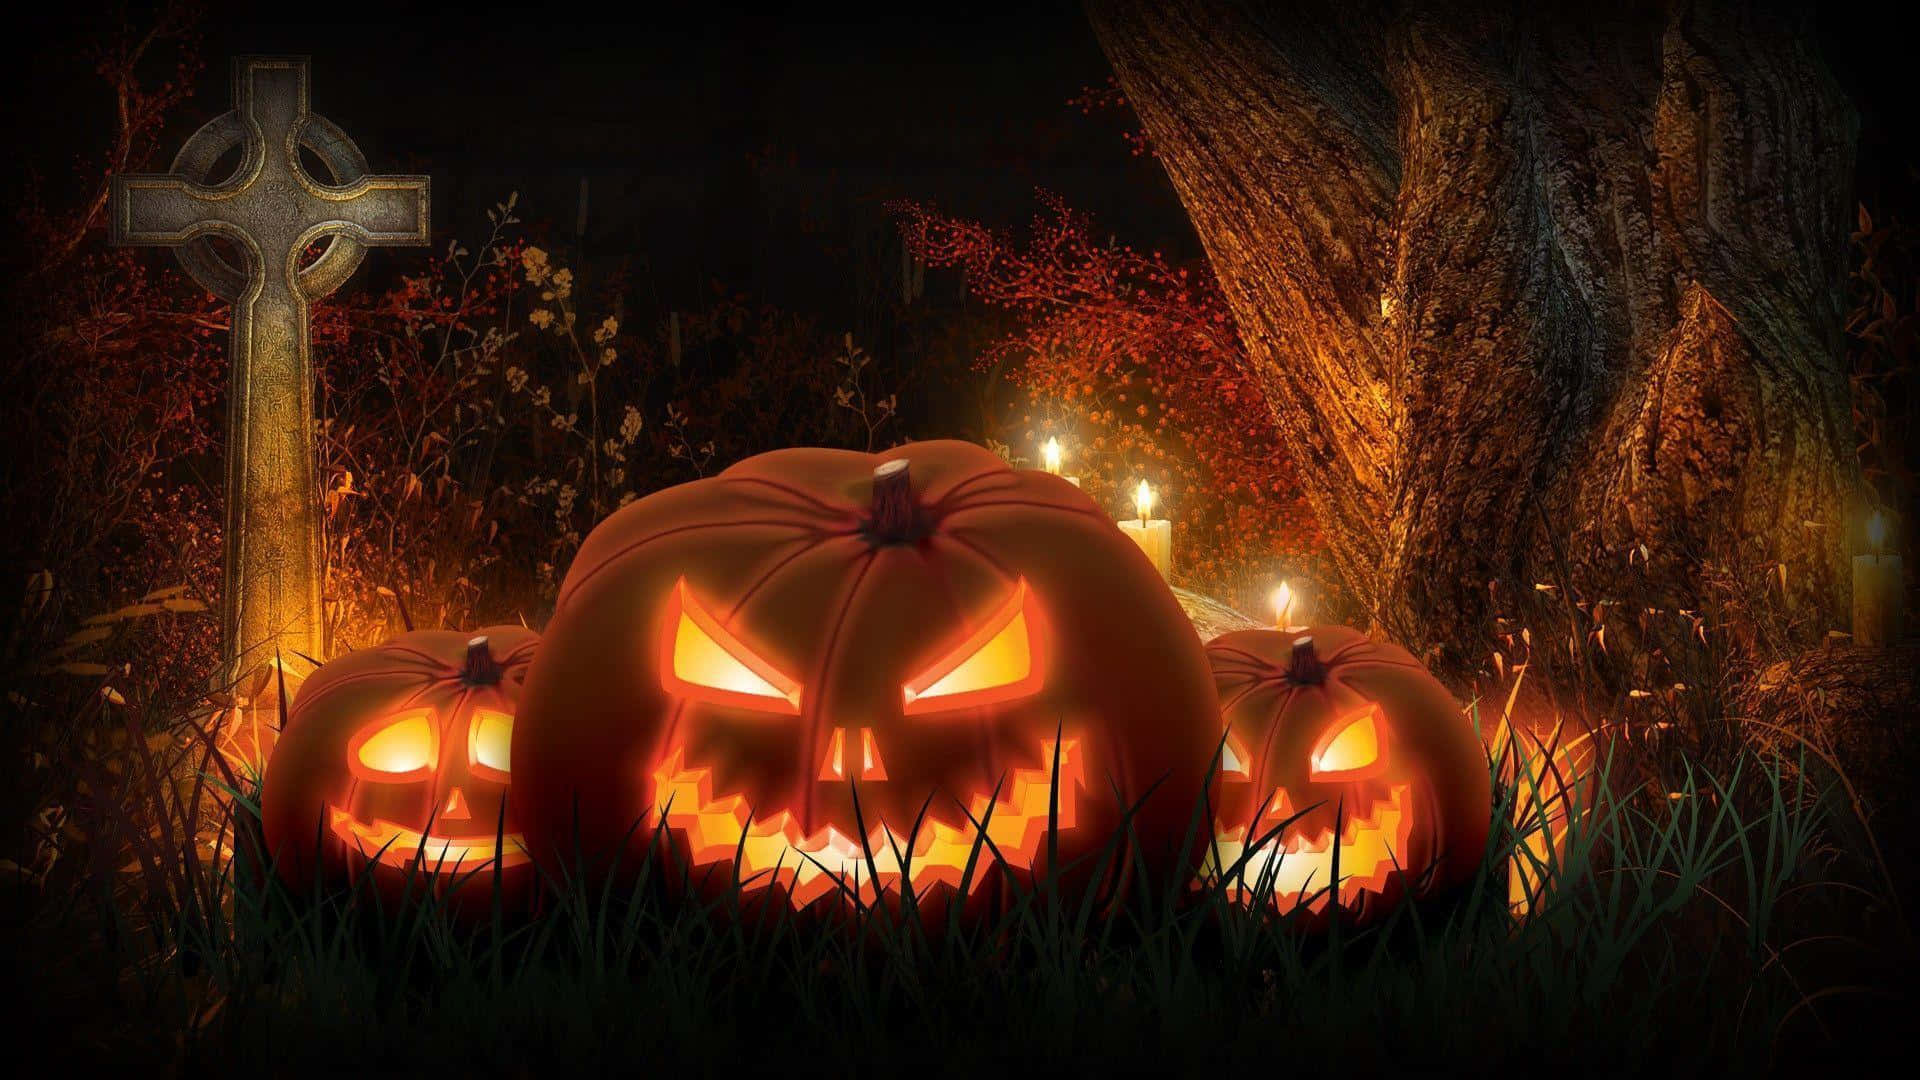 A Halloween Scene with a Jack-o'-lantern, a Scary Scarecrow, and a Mist-filled Graveyard Wallpaper